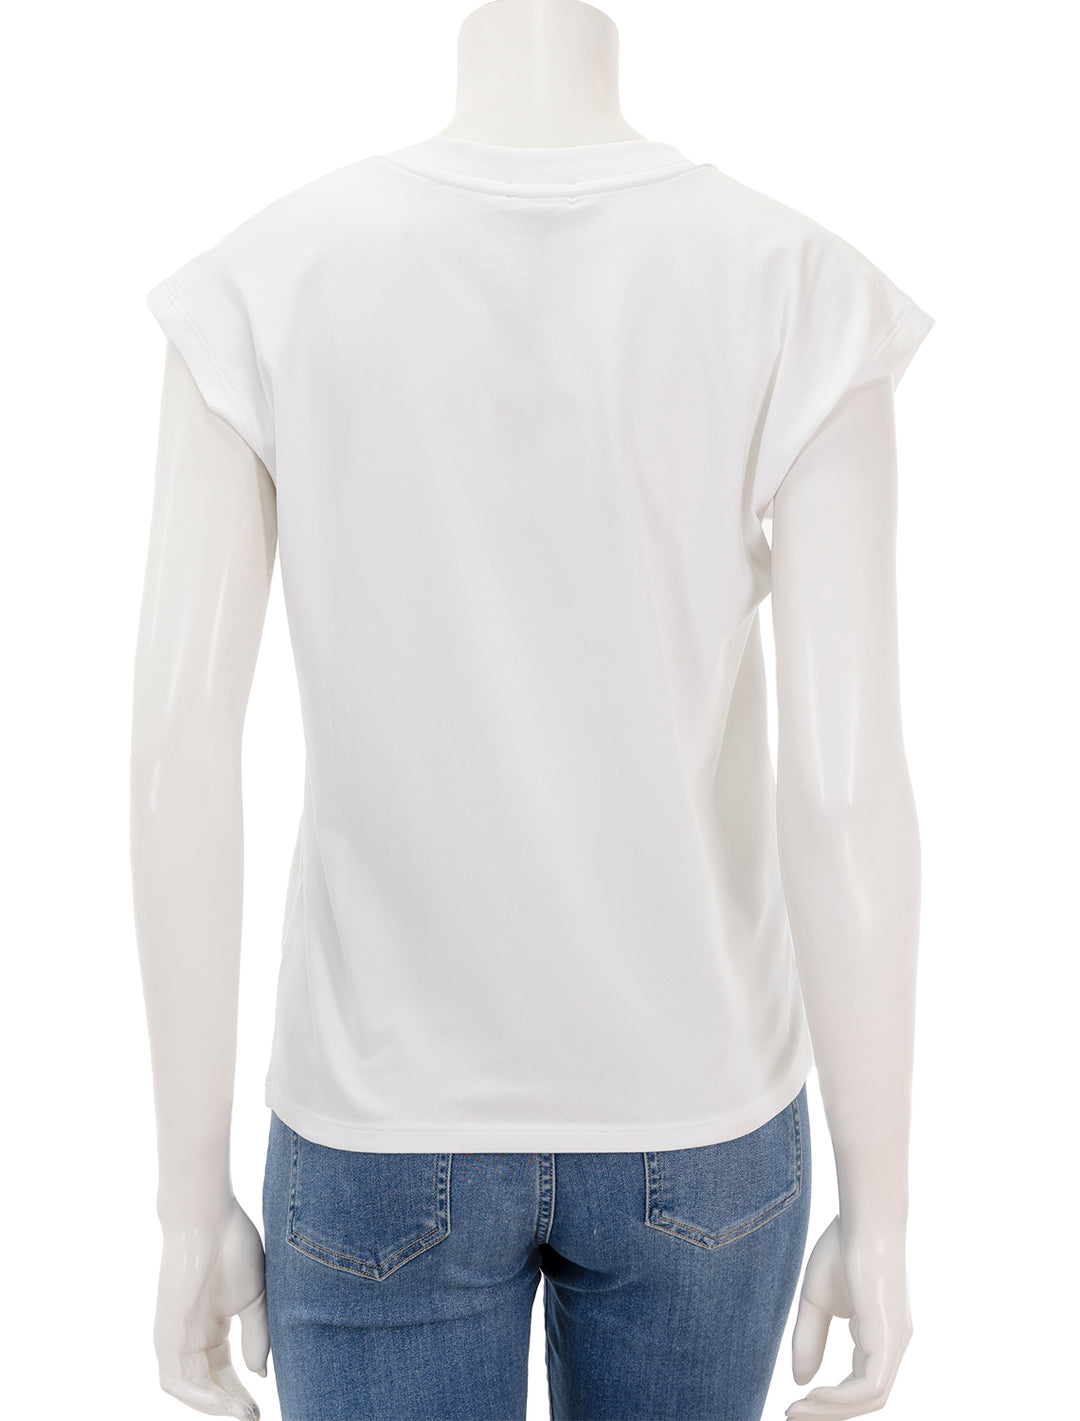 Back view of Patrick Assaraf's iconic vneck dolman tee in white.